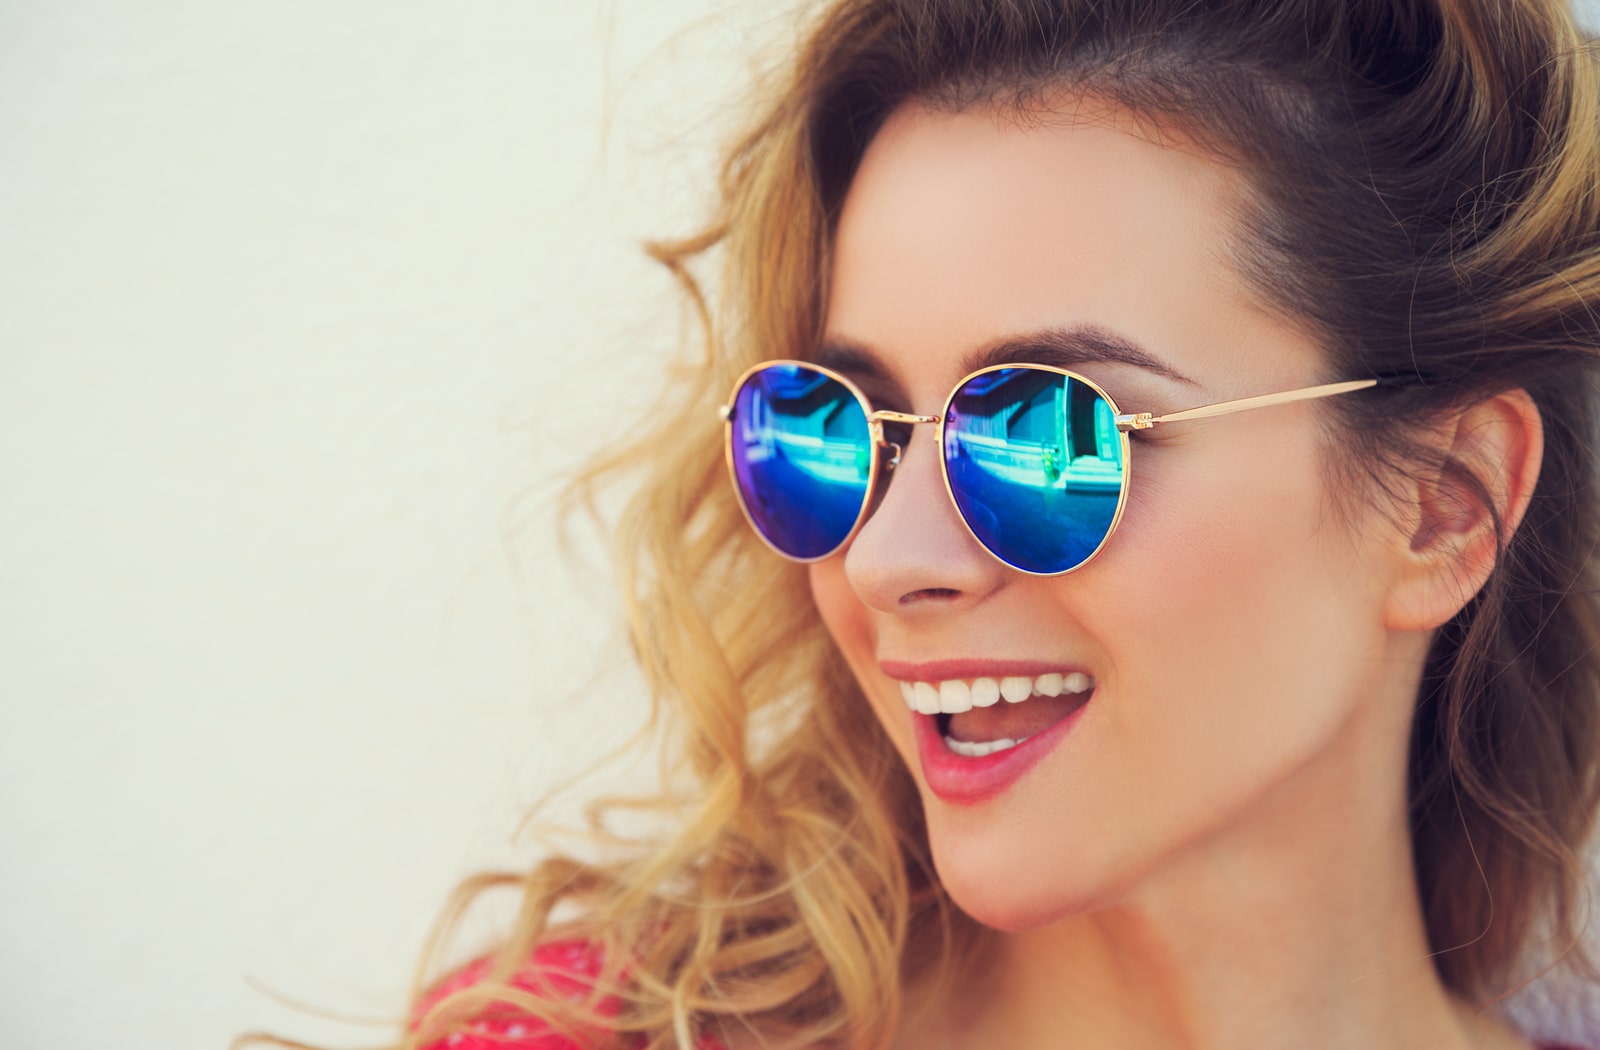 A smiling woman wearing a pair of polarized sunglasses